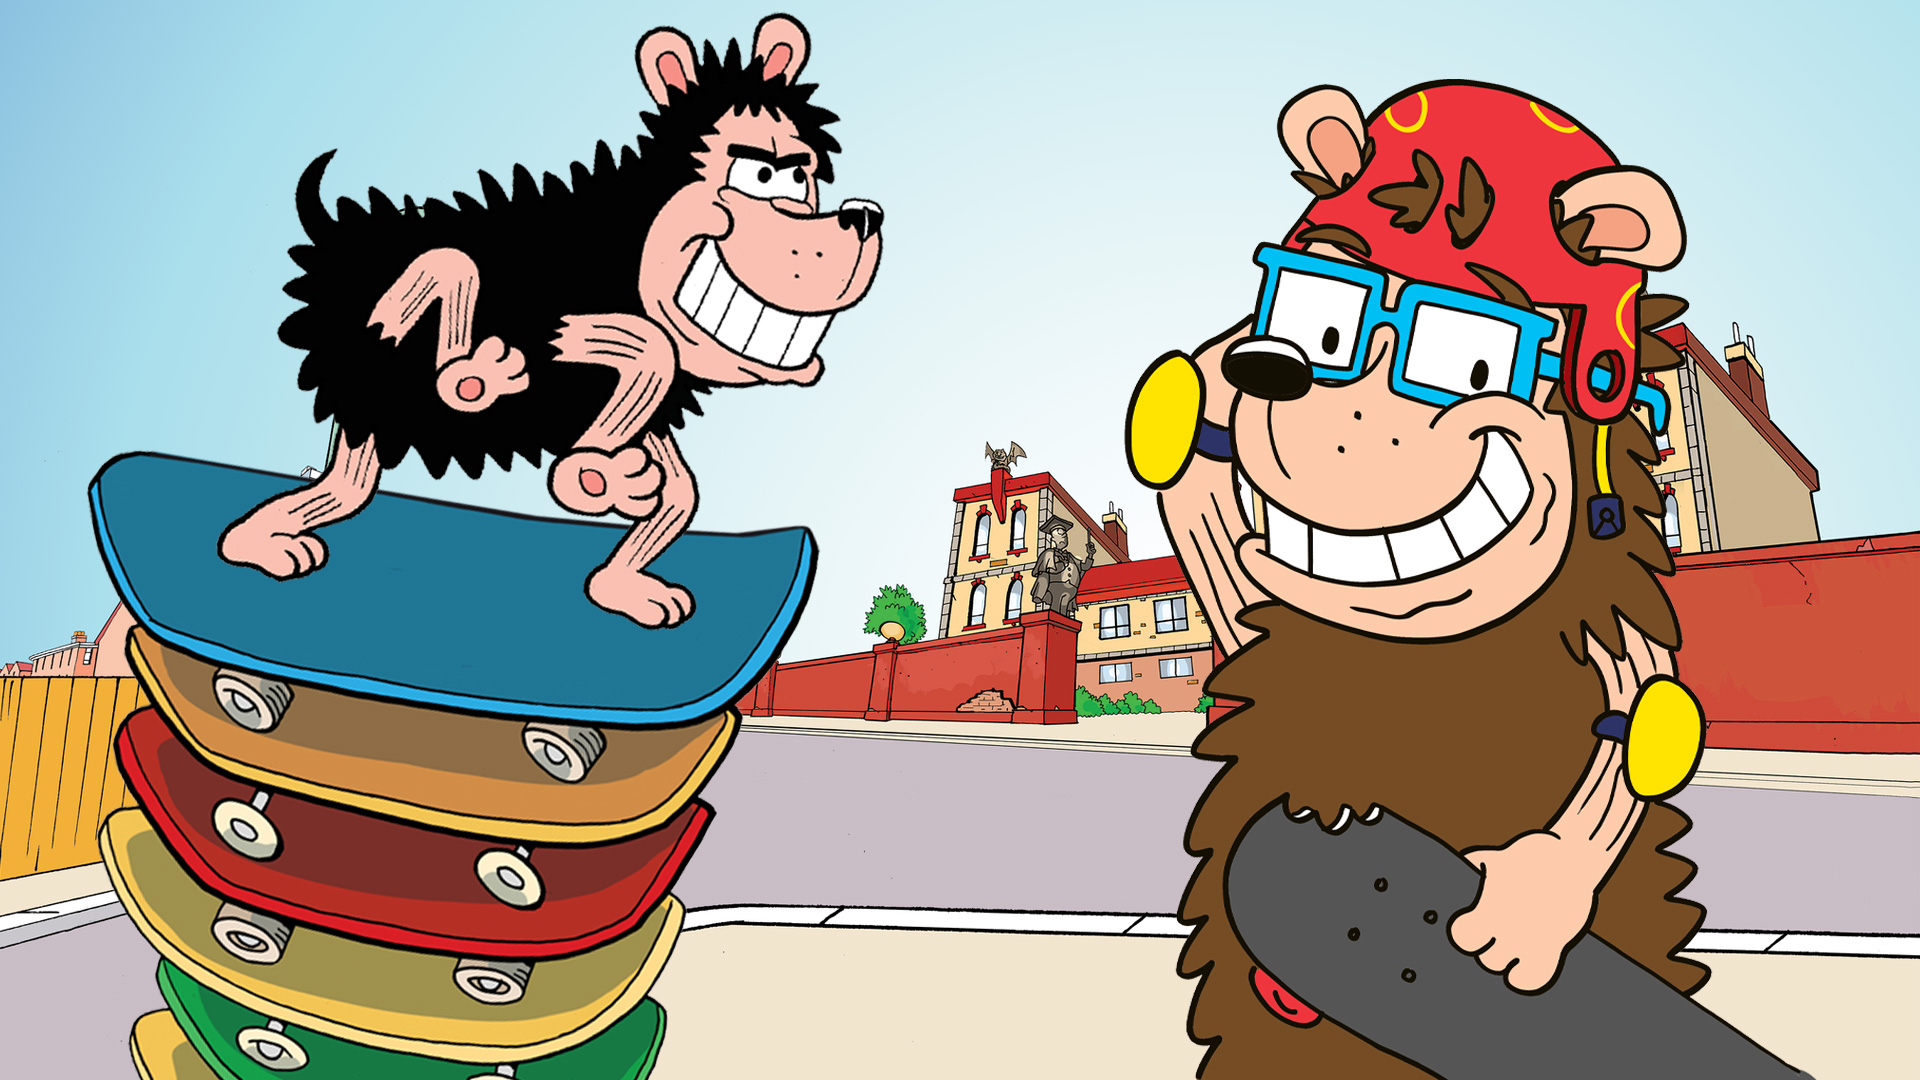 Phil and Gnasher messing about with skateboards